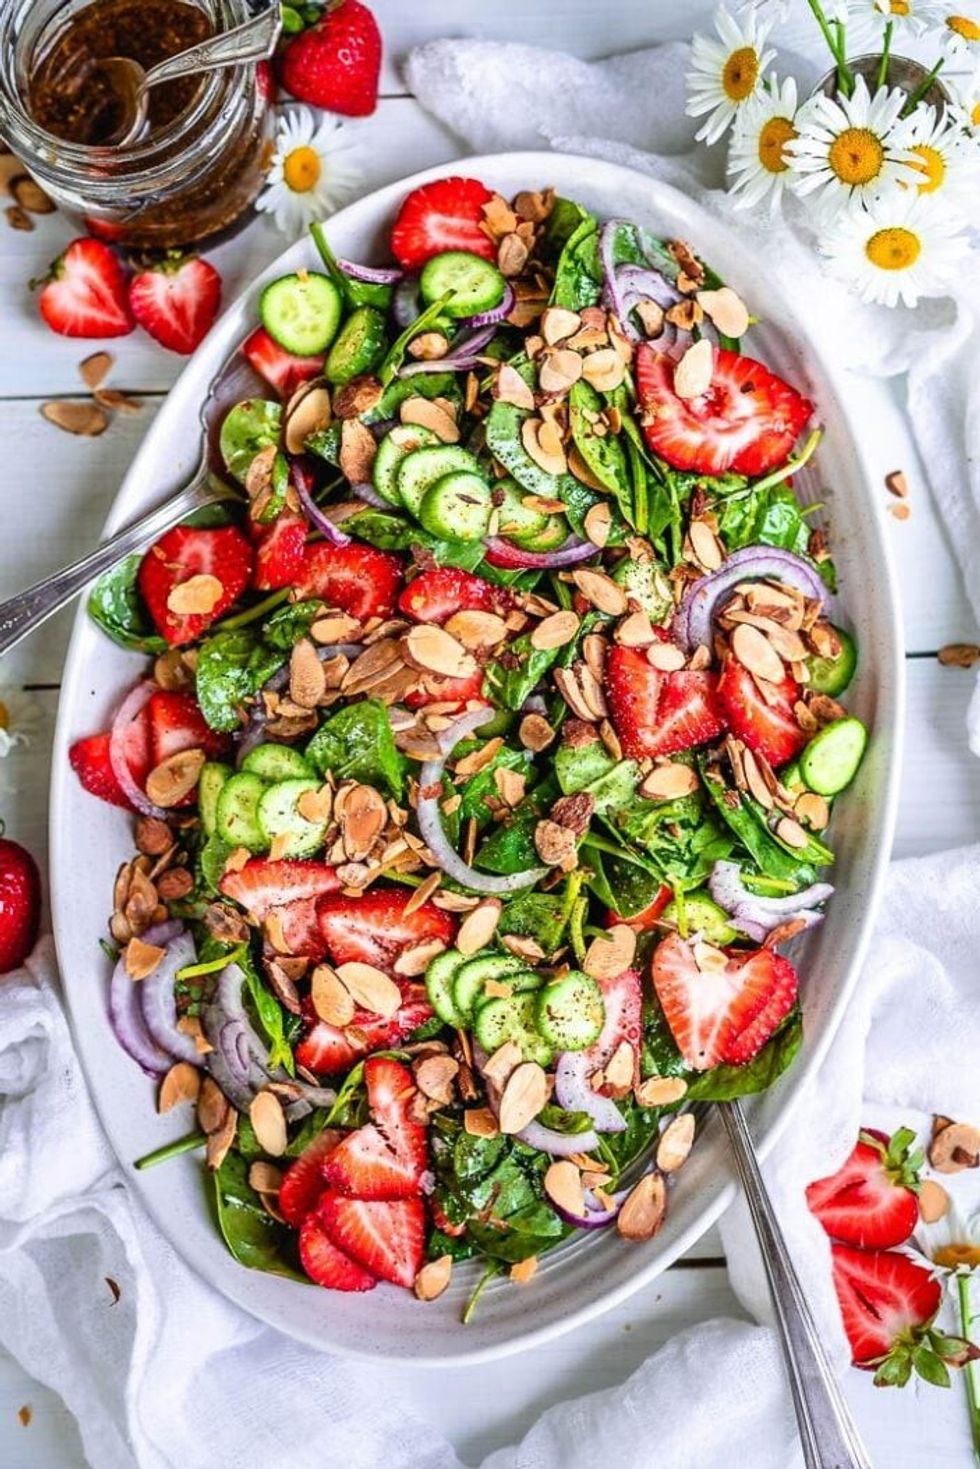 STRAWBERRY SPINACH SALAD & BALSAMIC DRESSING